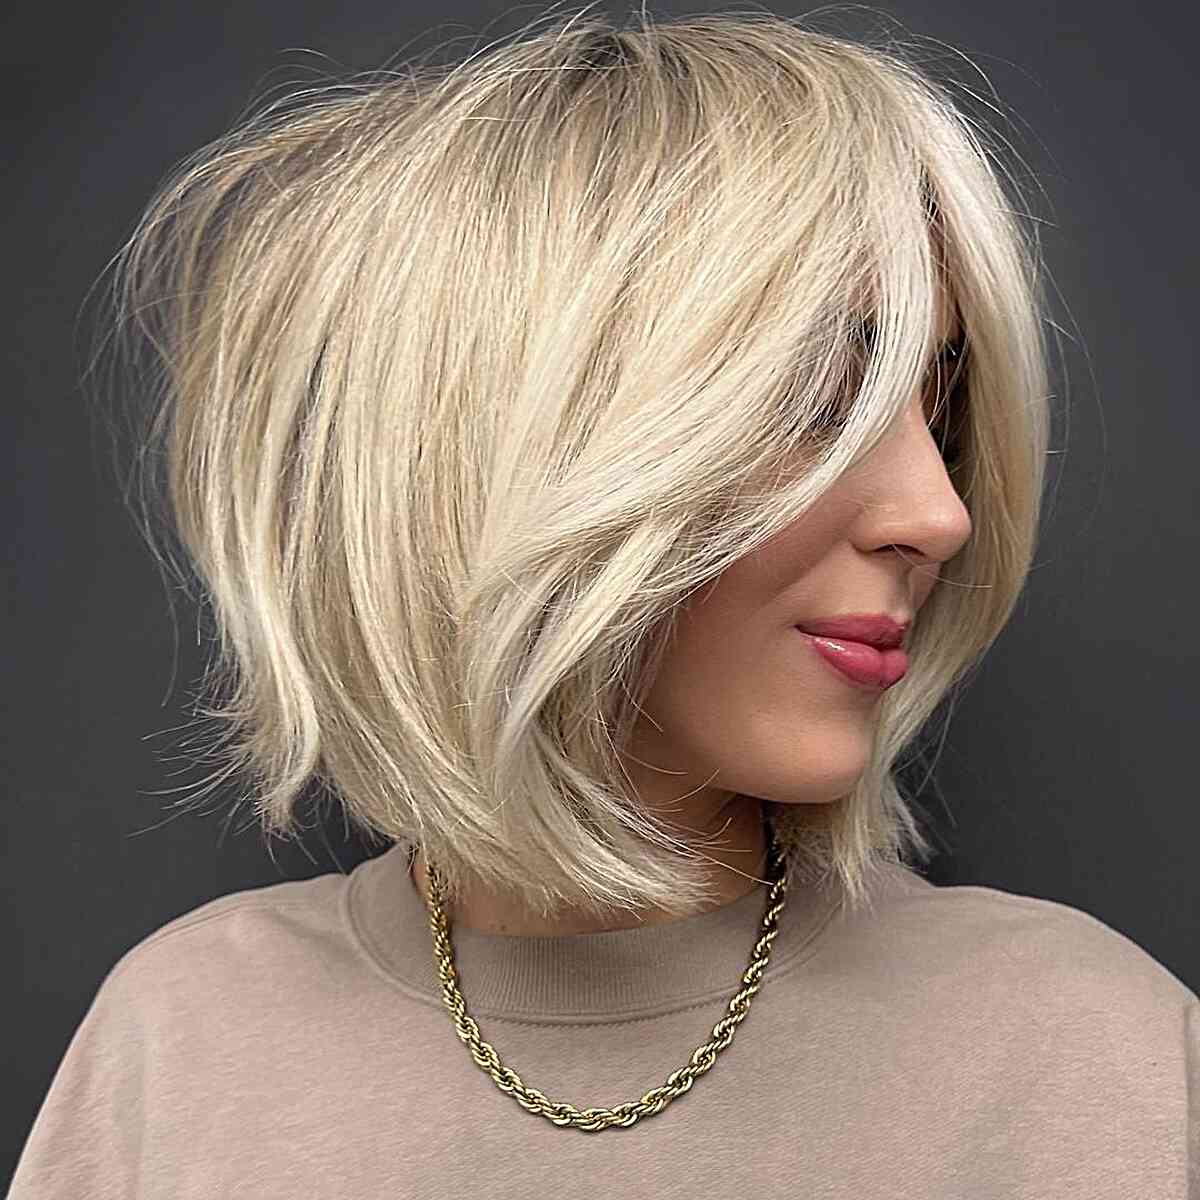 Short Blonde Dimensional Bob for women with thick tresses